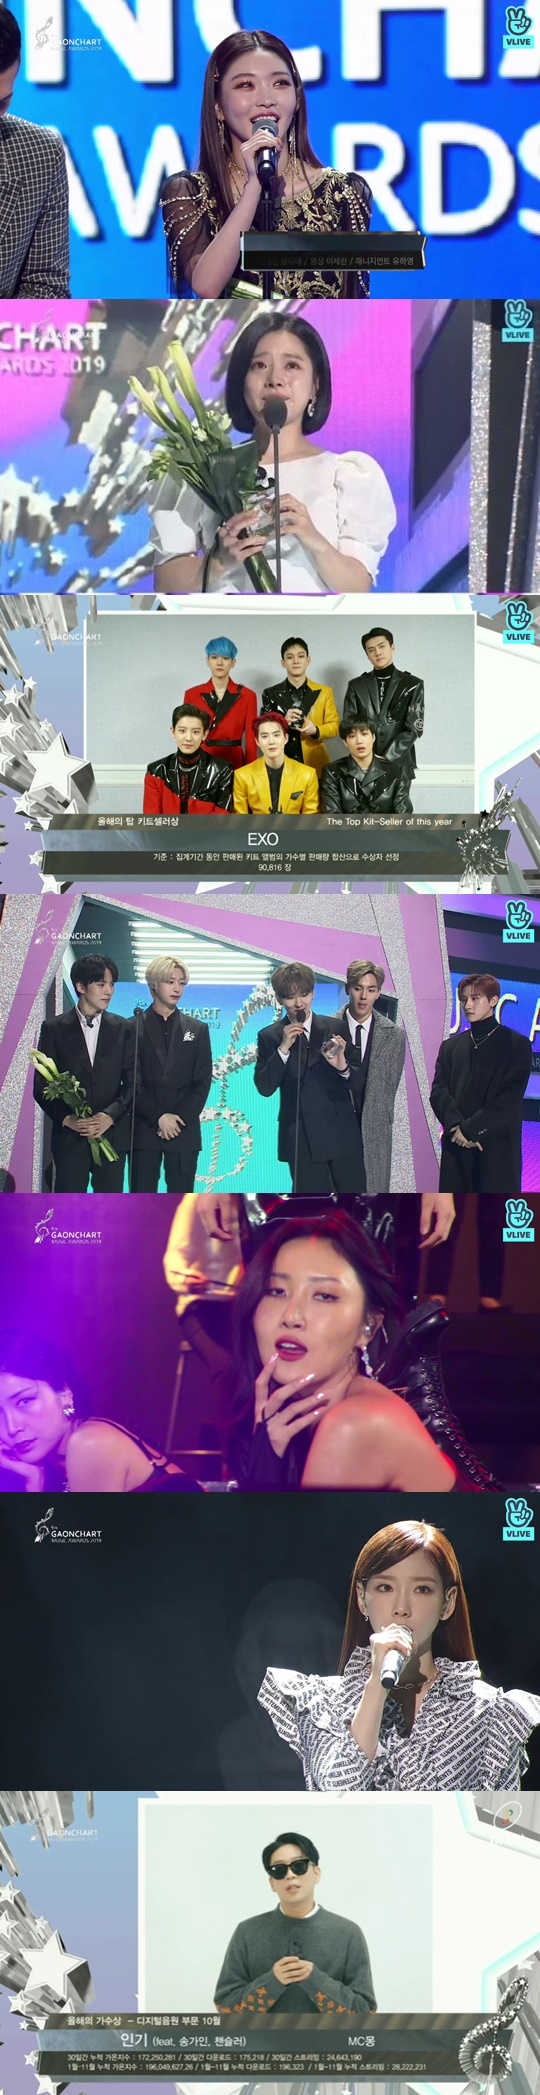 BTS proved its influence by winning three gold medals in the absence of the awards ceremony; Chungha won two gold medals for record production of the year and Hot Performance of the Year.On the afternoon of January 8, the 9th Gaon Music Chart Music Awards were held at Jamsil Indoor Gymnasium in Songpa-gu, Seoul.On this day, BTS won three titles in the second quarter of the Fijical Album Division, Social Hot Star of the Year Award, and Retail Album of the Year.BTS, who was inevitably unable to attend the awards ceremony, said in a video, I would like to express my gratitude to all those who loved our music.Above all, I love Ami (official fandom name), who sends us a big cheer.I will repay your support with a cooler music.  I am grateful to the big hit family of Bang Si-hyuk PD who gave us full support.I would like to see you a lot and ask you to support me a lot. Chungha won two awards for the Hot Performance of the Year and Recording of the Year. I think it is worth more than any prize, which I did not think.It is more meaningful to have received awards from those who supported me and gave me a lot of trouble when I was always receiving awards.  I started at a small company, but I would not have achieved a miracle if it was not for fans. EXO, who failed to attend the awards ceremony, also won two gold medals; EXO won the fourth quarter of the Fijical Album category and the Top Kit Seller of the Year award.EXO said, I have Ben loved by Obsession this year and I am grateful that I received the award.I did not participate this time, but next time I will show you a nice look at the Gaon Music Chart. Ben also won two gold medals.Ben, who won the 2018 Award for Digital Sound of the Year for 180 degrees and opened the awards ceremony, won the award until July 2019 for Thanks for Breaking Up.Immediately after the award, Ben said, I will not forget this gratitude. I hope everyone is healthy and happy this year.I will always listen to good music. In addition, Seventeen enjoyed the award in the first and third quarters of 2019 in the Fijical Album category.Bens mentor, Vibe Yoon Min Soo, also enjoyed the prime ministers joy with Jang Hye-jin.Yoon Min Soo, who gave a big bow on stage to thank Jang Hye-jin, said, I told the audience during the concert last year, and I told all the seniors and viewers who are here today.Vibe did not do anything shameful. The companies are also misunderstood, but I want them to sing and music as they are now.I hope that those who correct wrong things and honestly use them will not suffer goodwill, he refuted once again about the controversy.Meanwhile, as of December 2018 through November 2019, the digital sound source category for this years singer award was awarded by Ben (180 degrees), MC the Max, Hwasa, Taeyeon, Red Puberty, Davichi, Jang Hye-jin & Yoon Min Soo, Ben (Thank you for breaking up), Sunmi, Akdong Musician, MC Mong, and IU In the Fijical album division, Seventeen in the first and third quarters, BTS in the second quarter, and EXO in the fourth quarter.The following is a list of winners of the 9th Gaon Music Chart Music Awards△ Singer of the Year Award (digital sound source category): Ben (180 degrees) MC the Max, Hwasa, Taeyeon, Red Puberty, Davichi, Jang Hye-jin & Yoon Min Soo, Ben (thank you for breaking up), Sunmi, Akdong Musician, MC Mong, IU (December 2018-2019). November)△ Singer of the Year Award (Fijical Album Division): Seventeen (first and third quarter of 2019), BTS, EXO△ Rookie of the Year Award: Yes (Digital Sounds Division), TOMORROW X TOGETHER (Fijical Album Division)△ World Rookie of the Year: Stray Kids, (girls)△ Social Hotstar of the Year Award: BTS△ Retail Album of the Year Award: BTS△ Shower of the Year Award: Ju Chan Yang (Chorus Division), Choi Hoon (Performance Division)△ The Songwriting of the Year: The Min Yeon-jae△ Composer of the Year Award: Black Eyed Pil-Win△ Overseas Music Awards of the Year: Anne-Marie 2002△ Overseas Rising Star of the Year award: Billy Eilisch Bad Guy△ Discovery of the Year: Enflying (Band Division), Casey (Ballard Division)△ Hot Performance of the Year Award: NCT Dream, Chungha△ Style of the Year Award: Choi Ri-an, Shim Hee-jung, Shin Ji-won, Lee Si-won (career graph category), Choi Hee-sun (stylelist category)△ Populer Singer of the Year Award: Lim Jae-hyeonTop Kit Sellers of the Year Award: EXO△ Long Run Sound Award of the Year: Paul Kim△ World Hallyu Star Award: Monster X△ Recording Production of the Year award: MNH Entertainment (Chungha already 12 oclock)Lee Ha-na